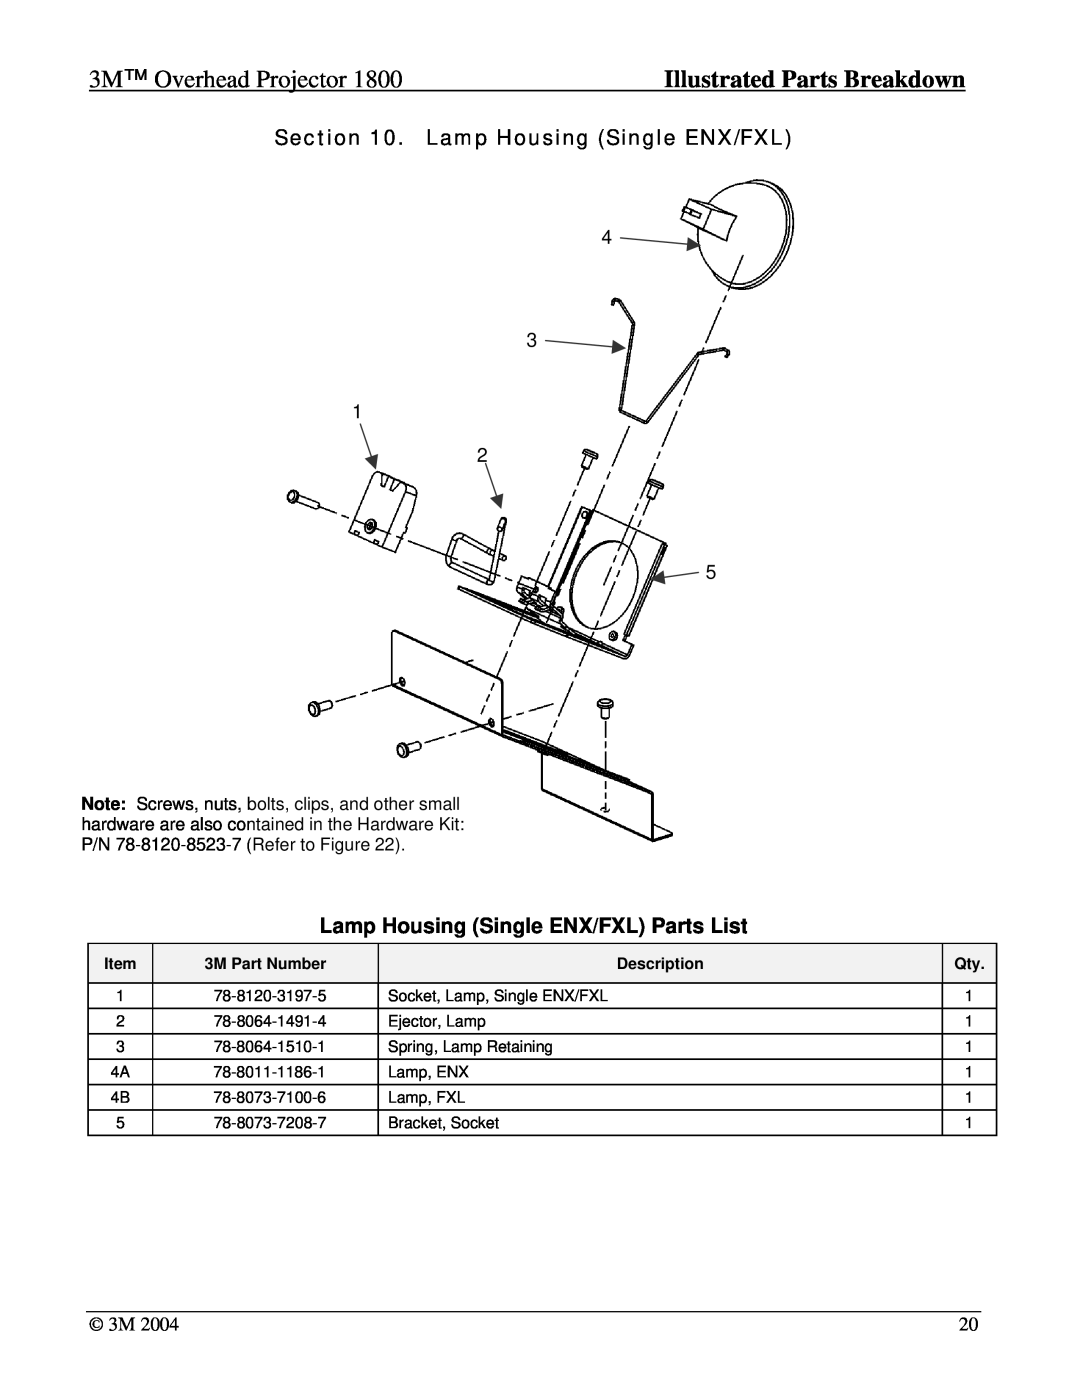 3M 1800 manual Lamp Housing Single ENX/FXL Parts List, 3M Overhead Projector, Illustrated Parts Breakdown 